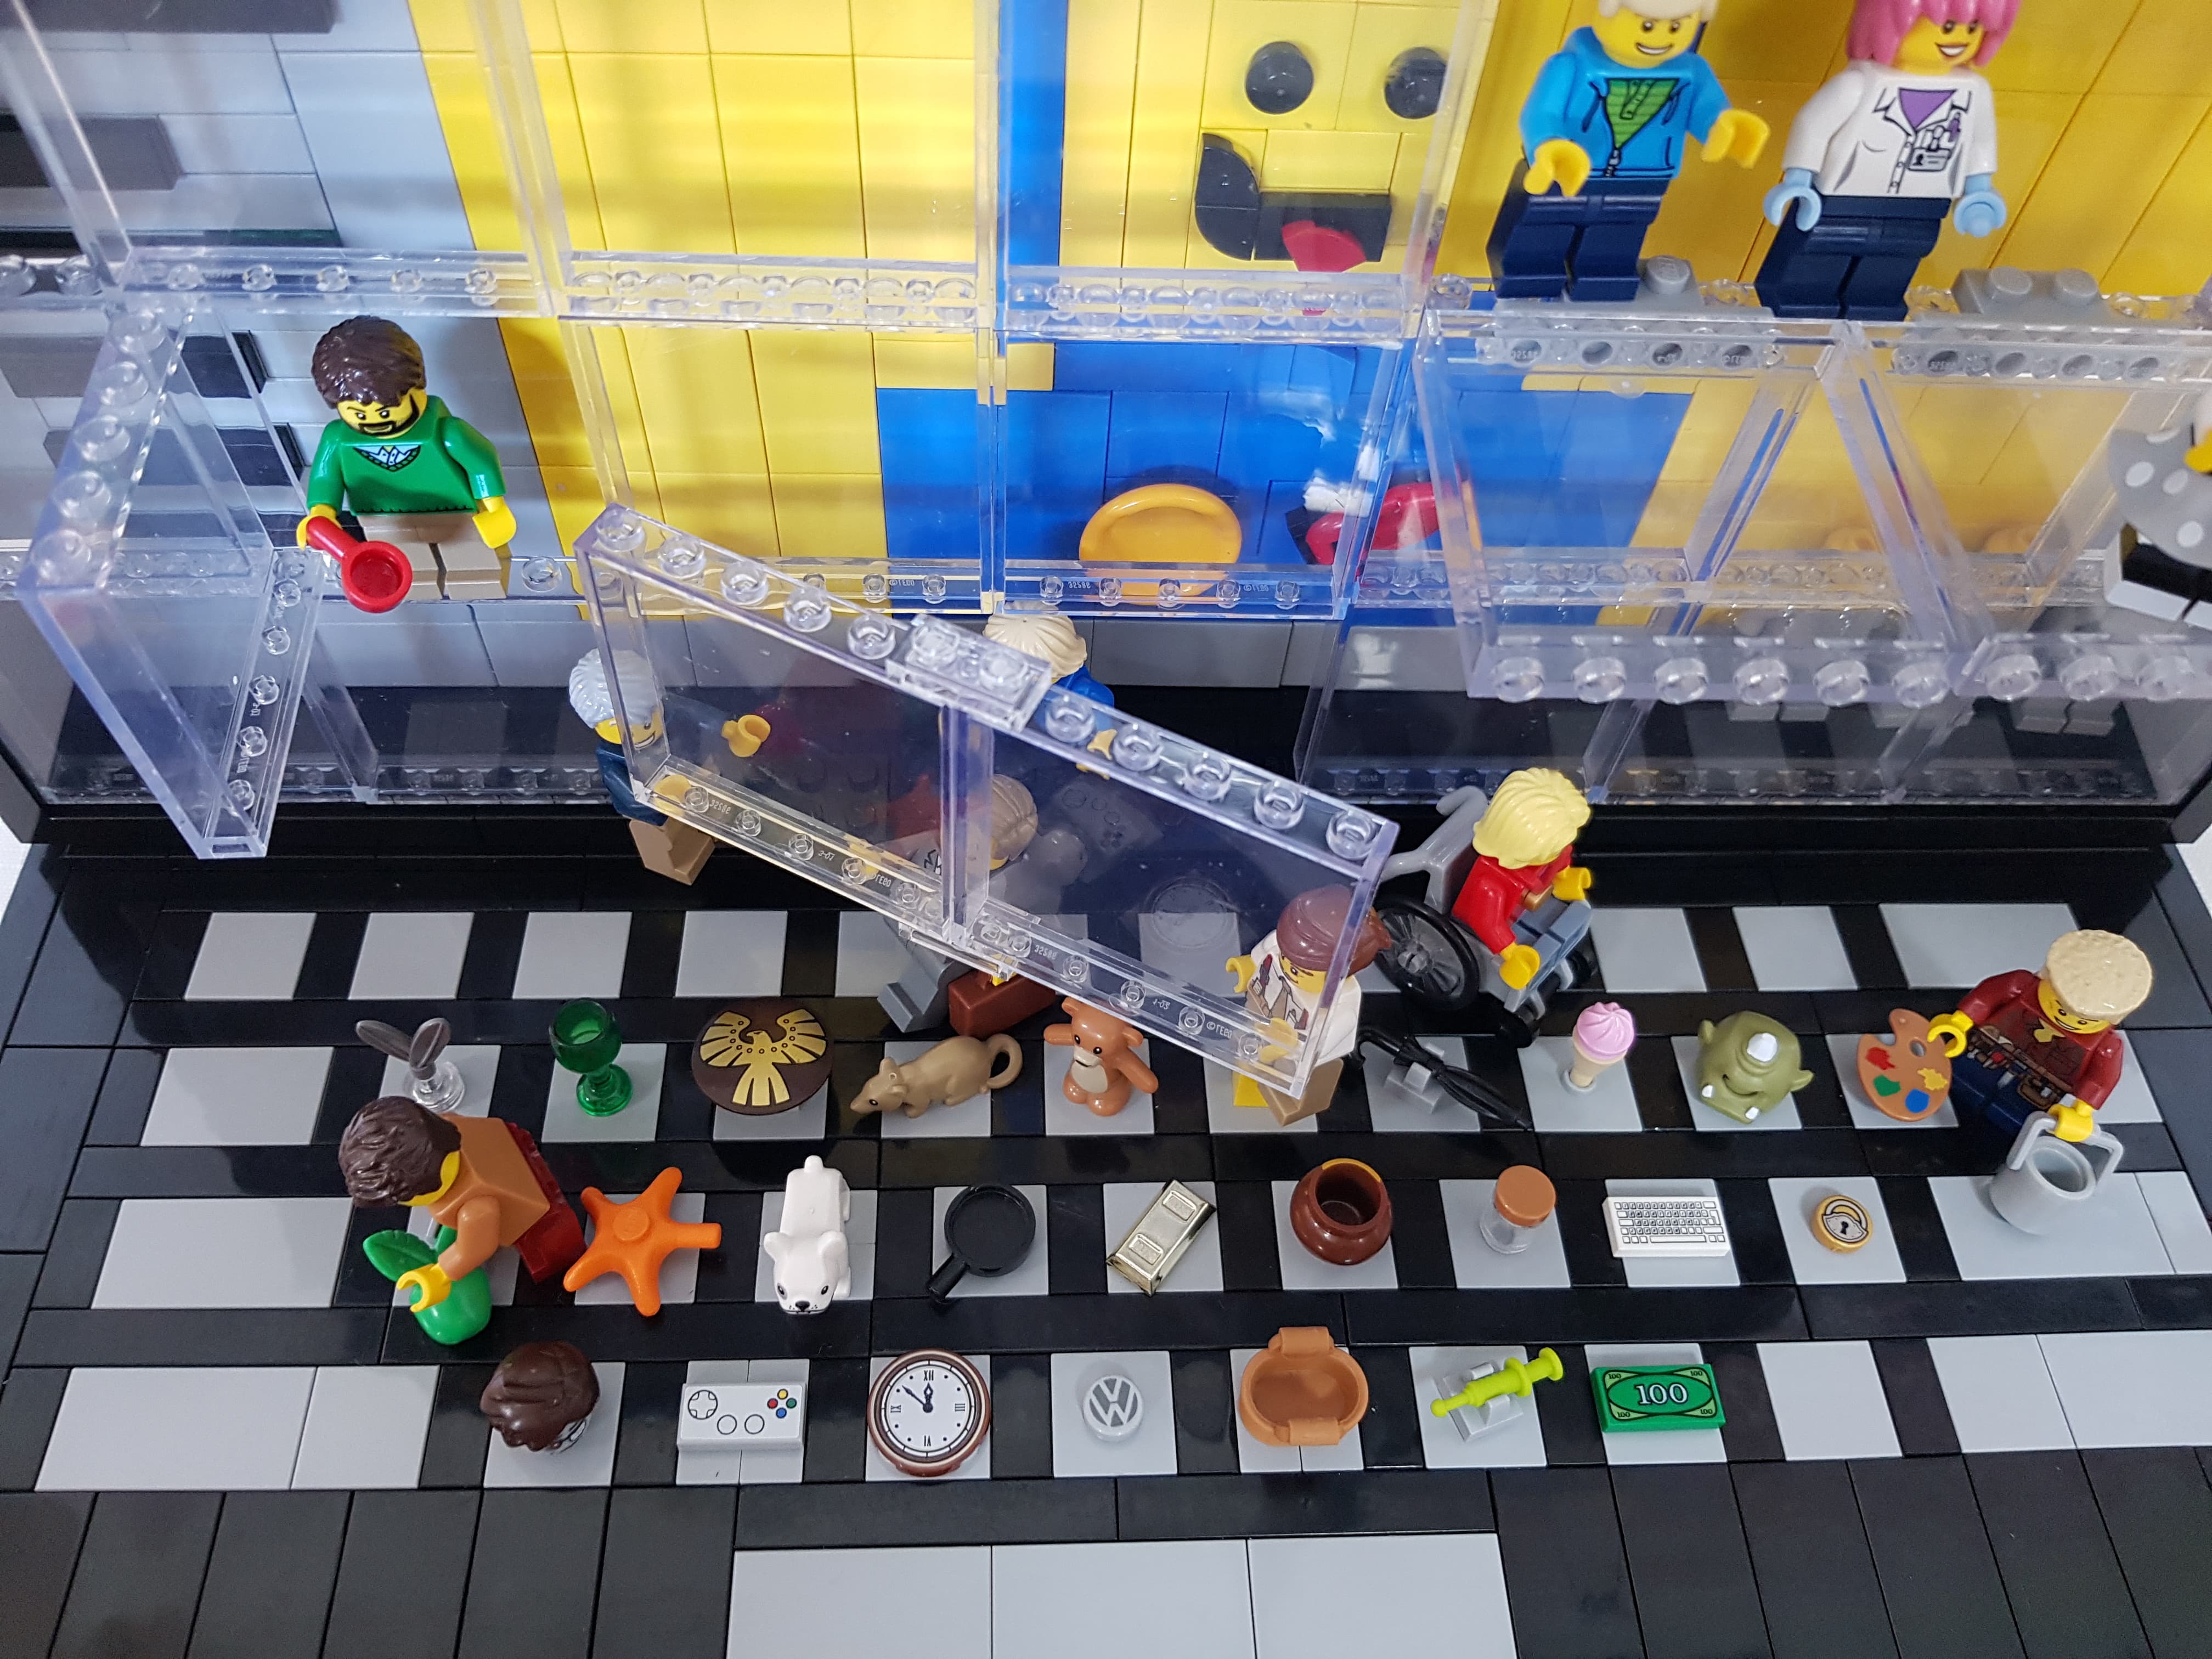 Image of laptop keyboard made of Lego with keys replaced by minifigure accessories of the same letter.